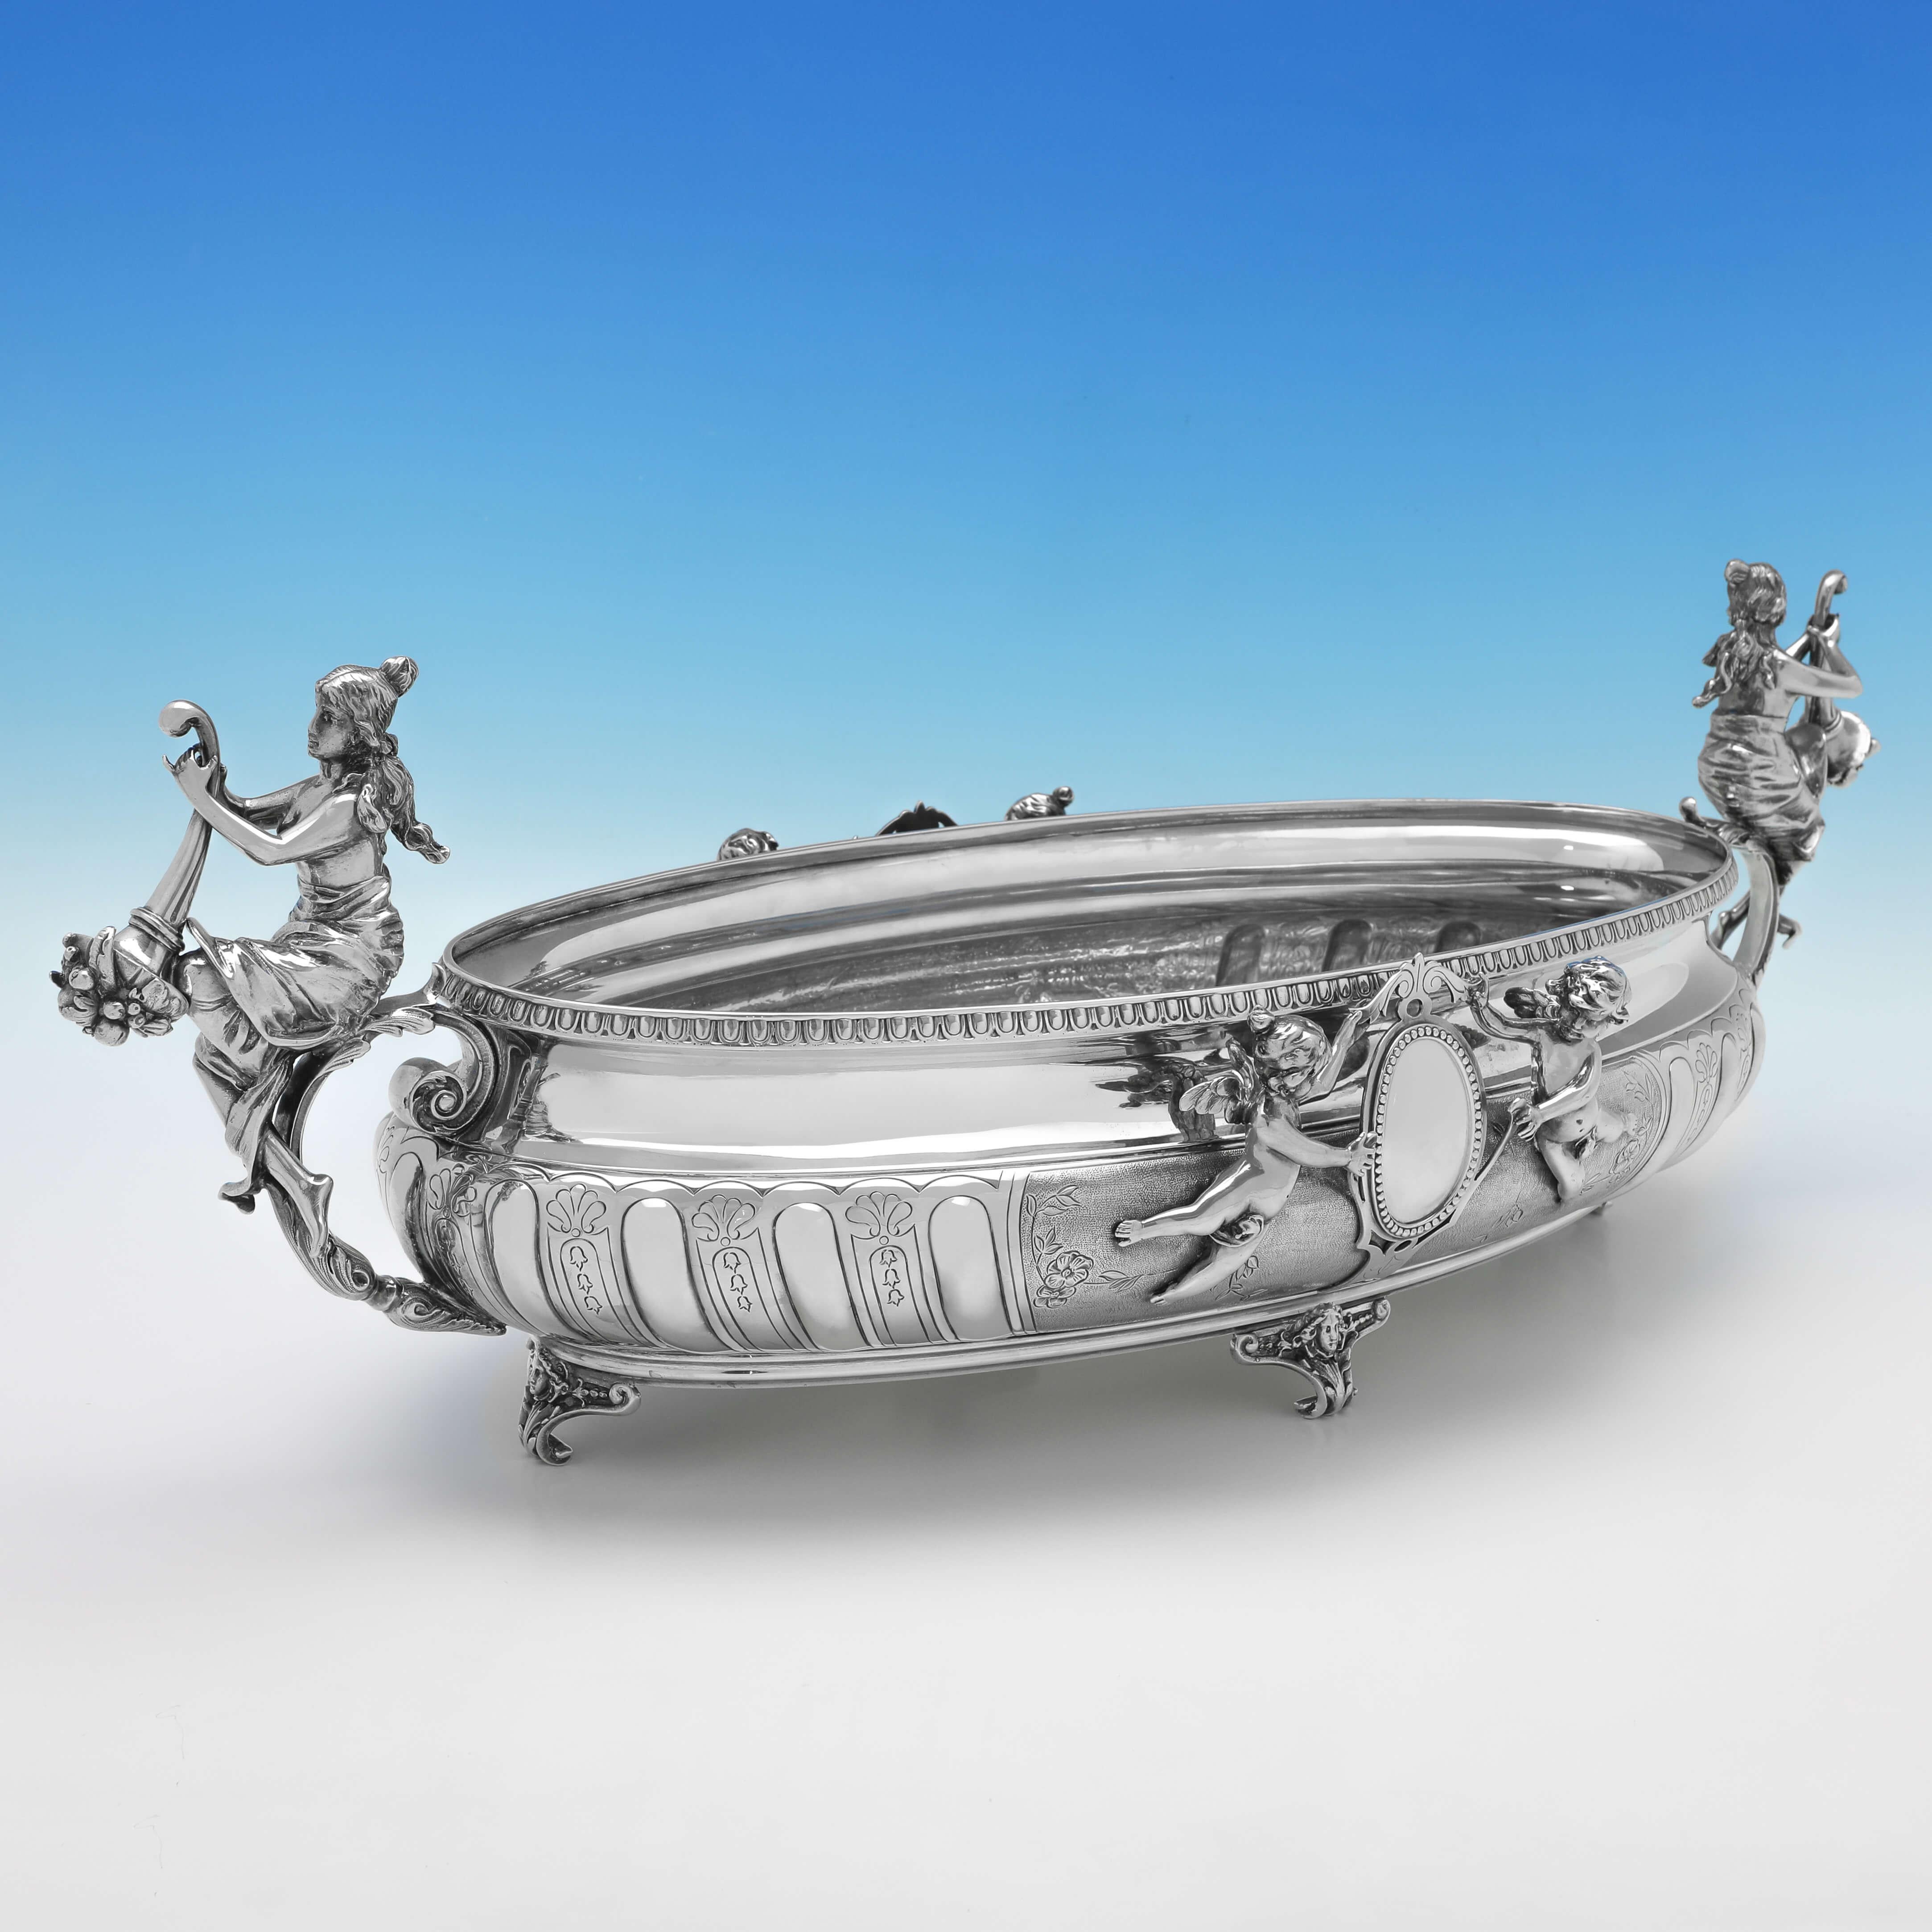 Carrying German silver marks used by Koch & Bergfeld from c.1870-1885 in Bremen, this impressive, Antique Sterling Silver Jardiniere, is oval in shape, and ornate in design, with wonderful chased and engraved decoration to the body, winged cherub